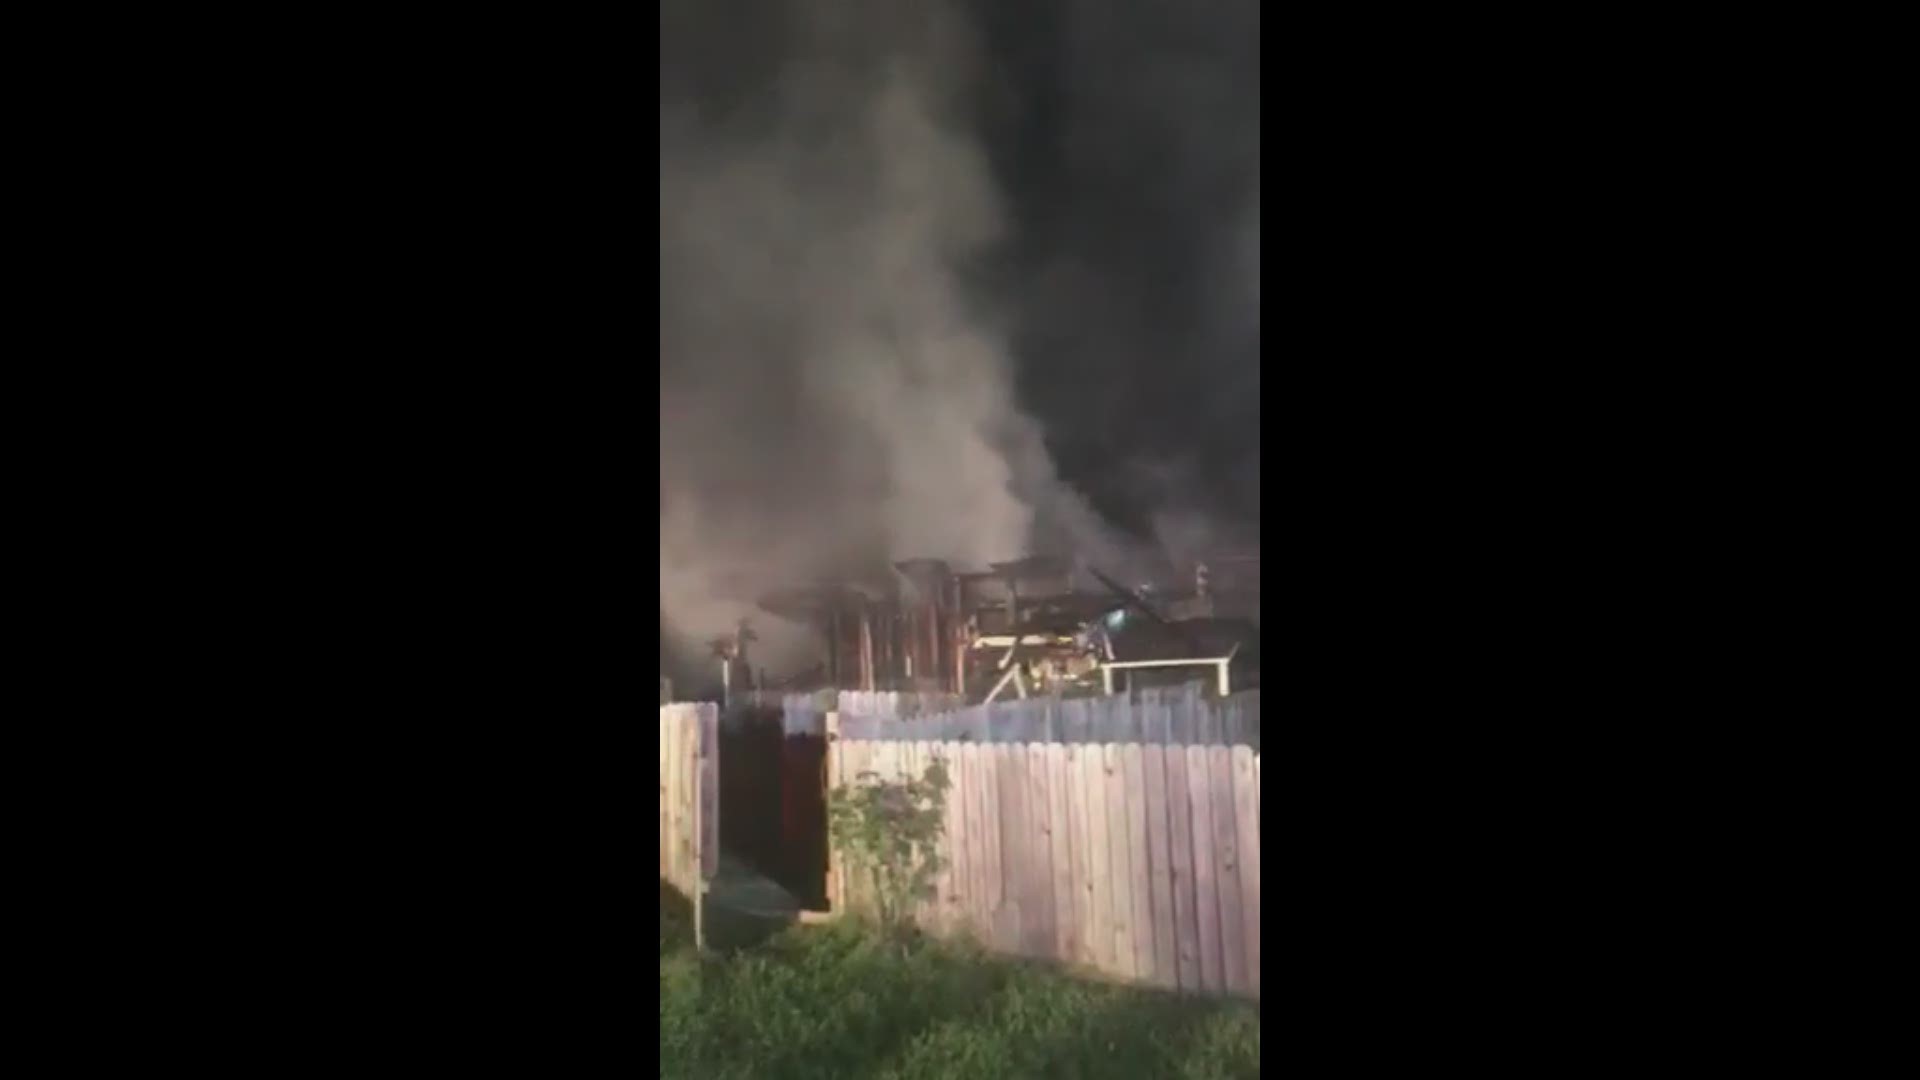 Multiple dogs were removed from the burning structure. (video via Erika Abrams)